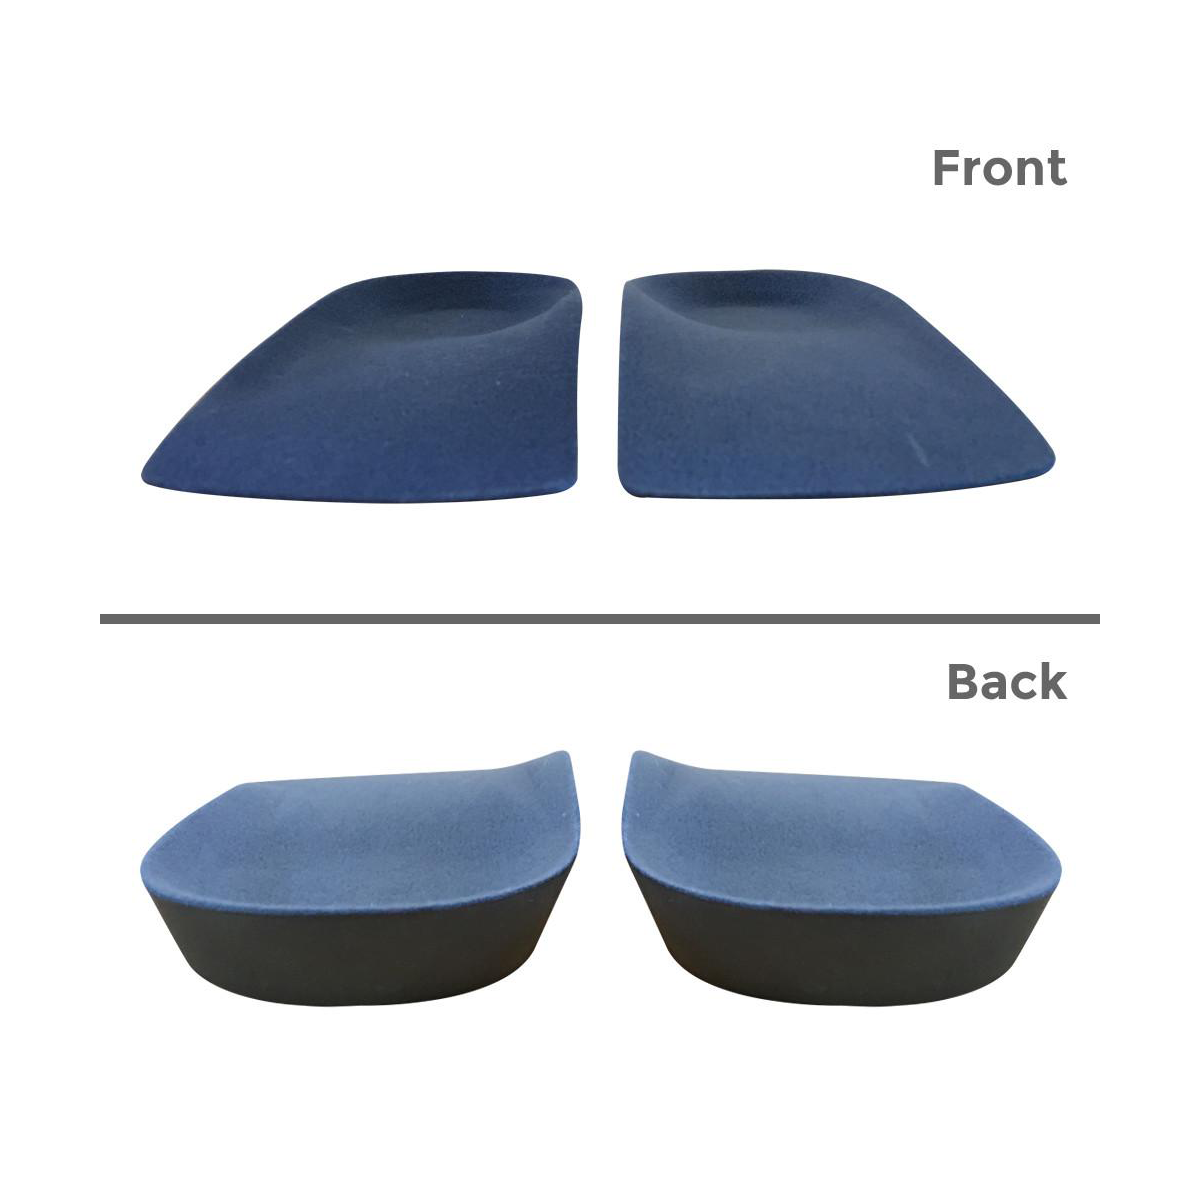 Insoles for Flat Foot, Arch Pain, and Heel spur